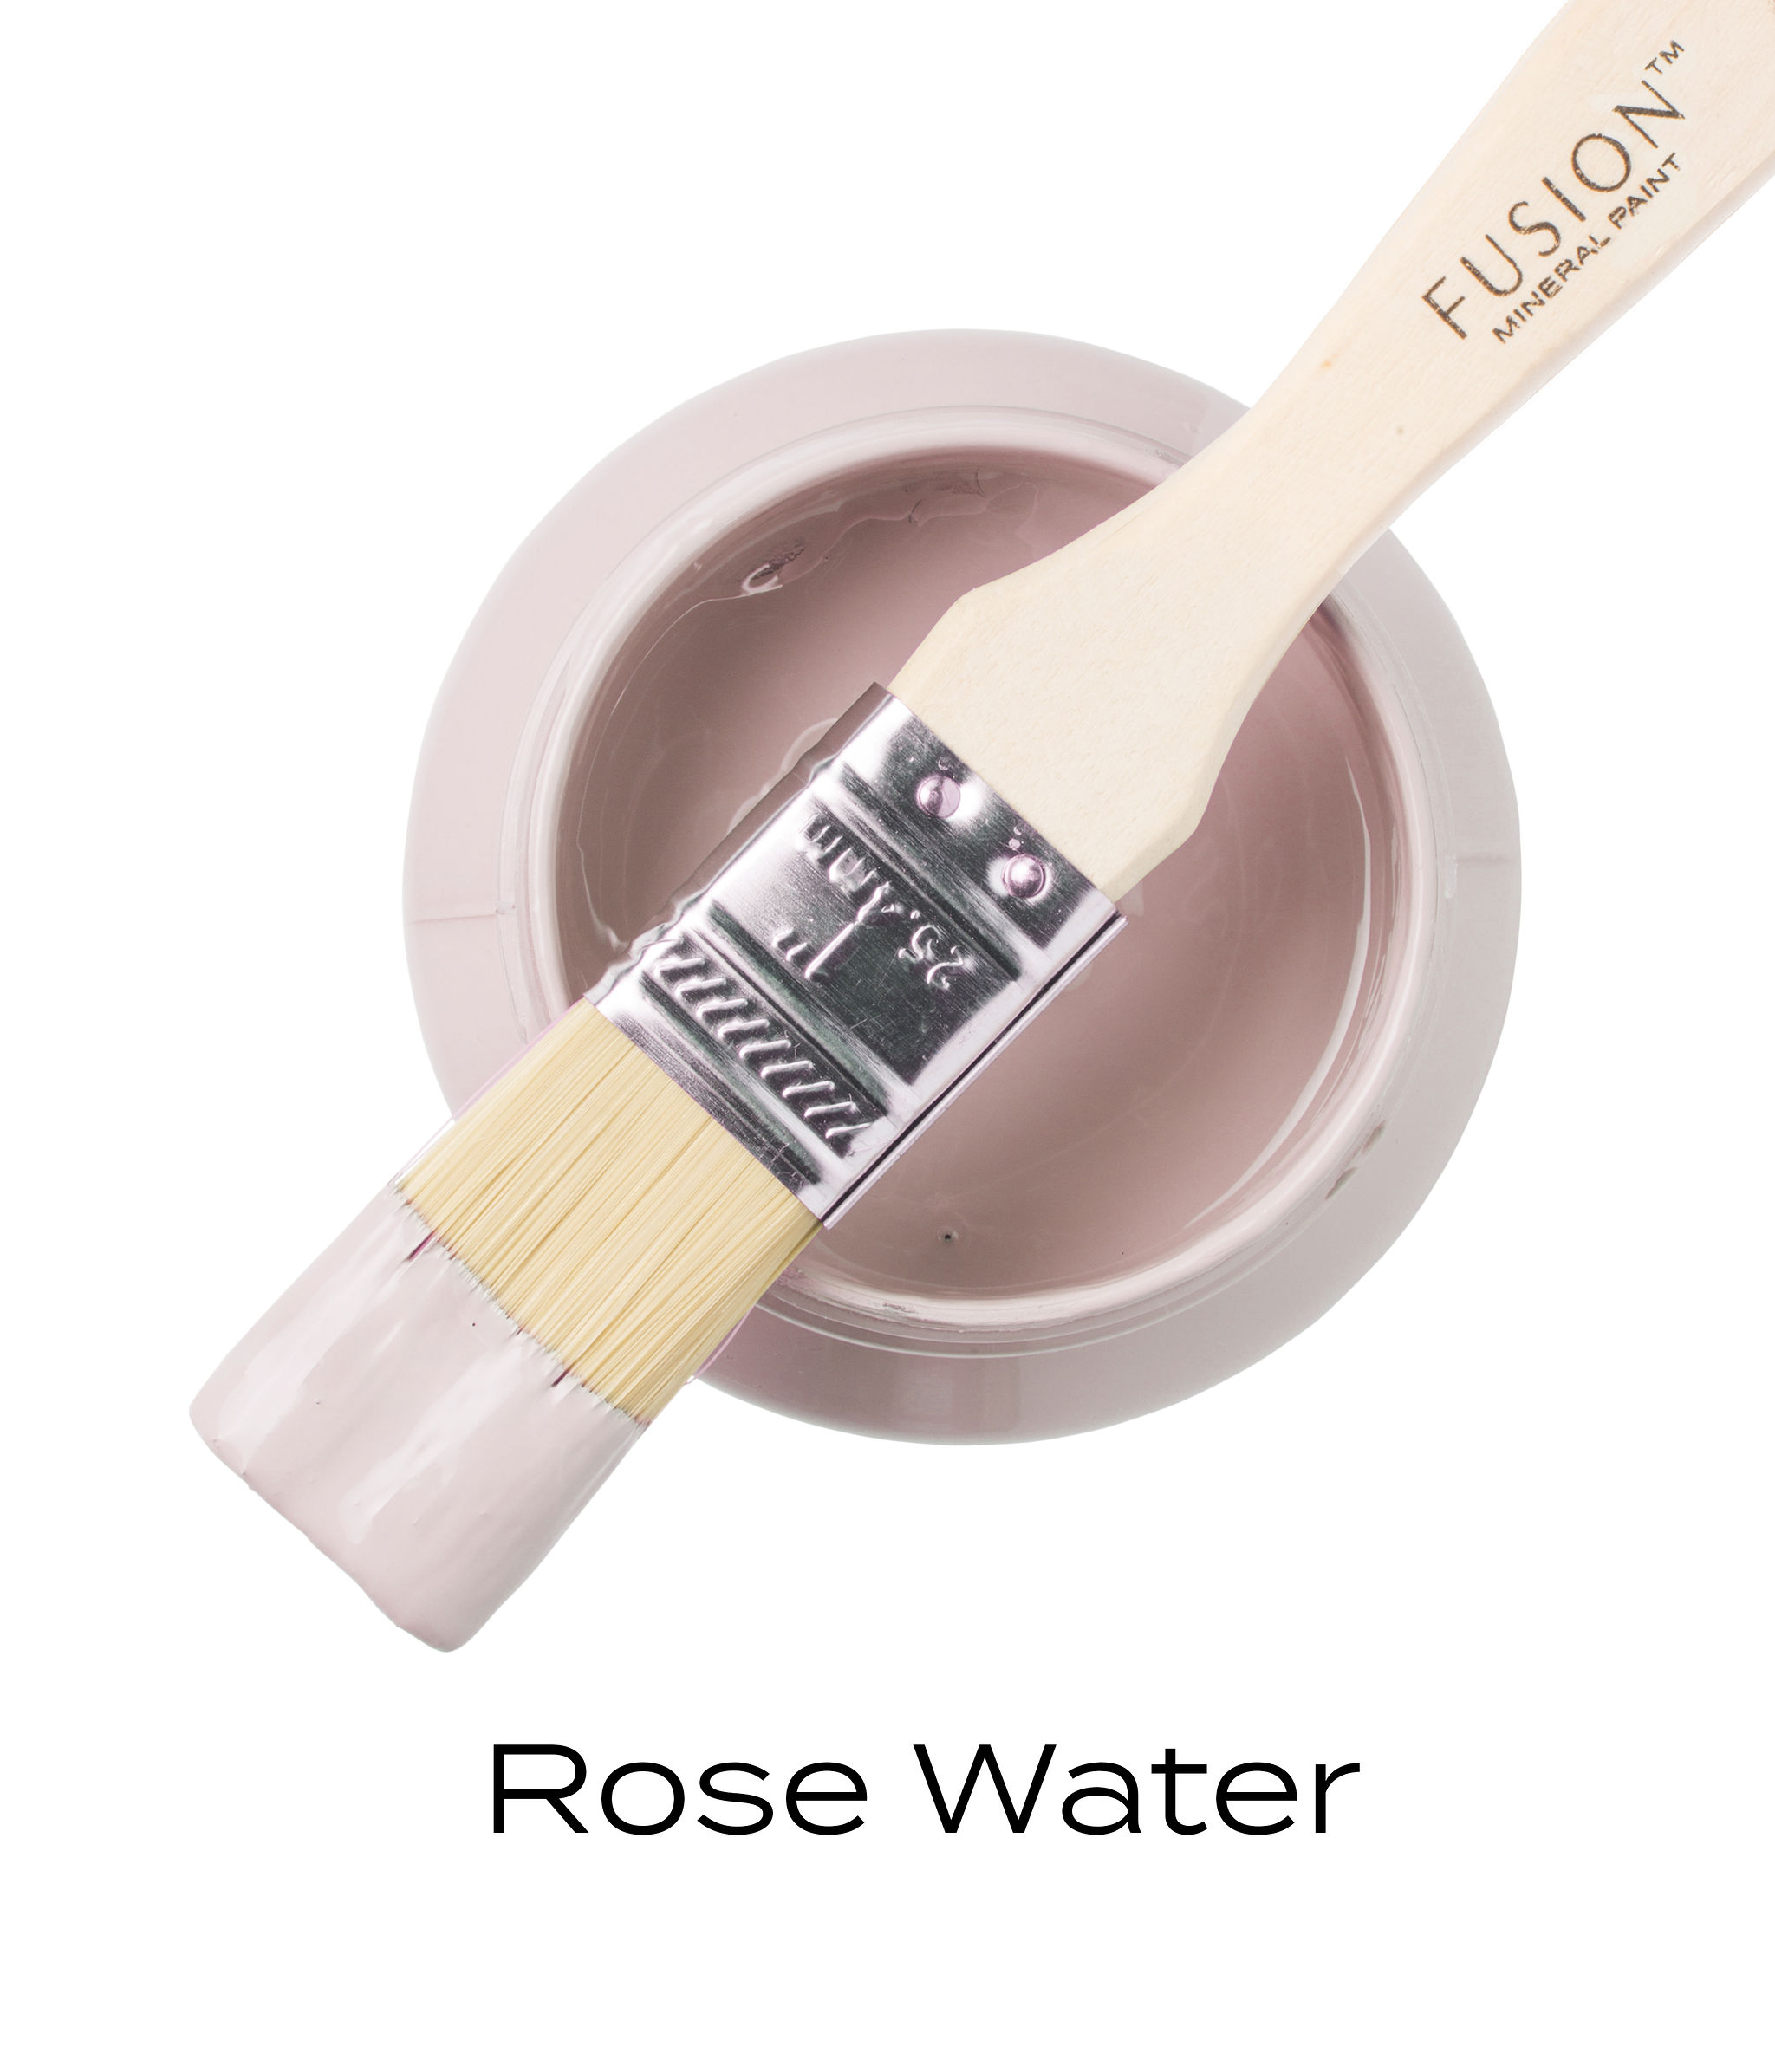 Rose Water Fusion Mineral Paint Goed Gestyled